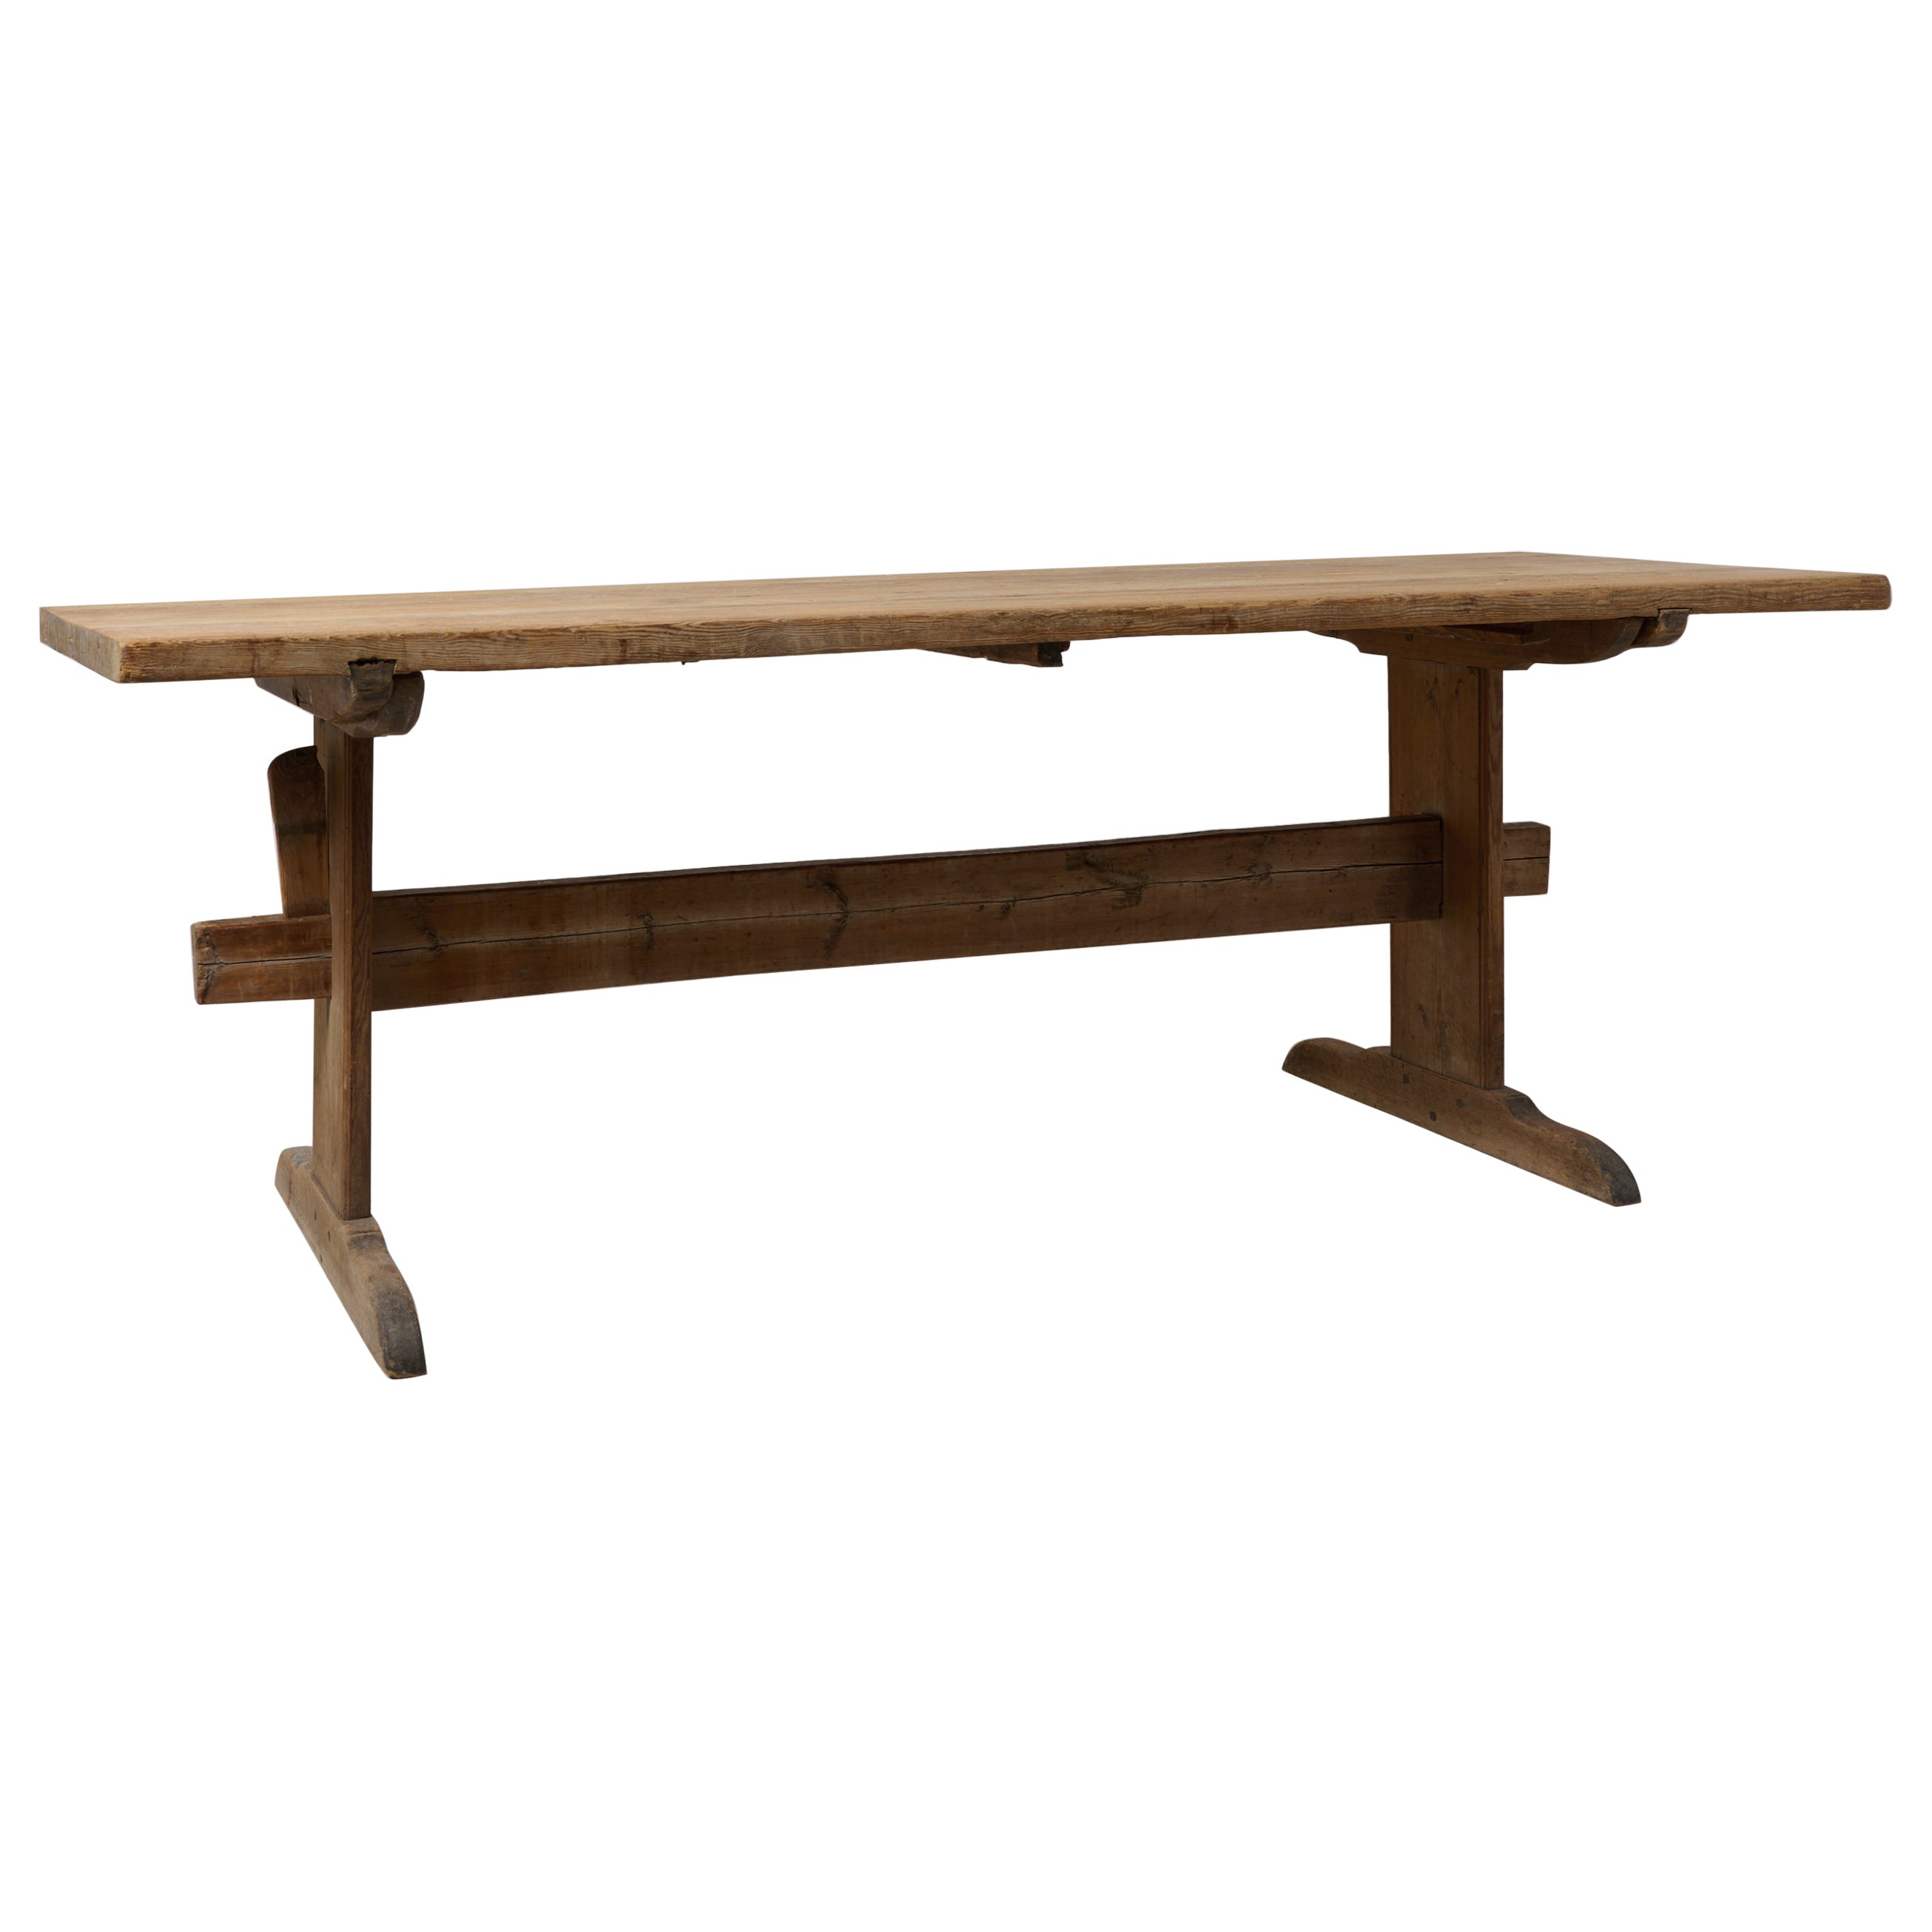 Antique Large Trestle Dining Table, Swedish Solid Pine with Genuine Patina 